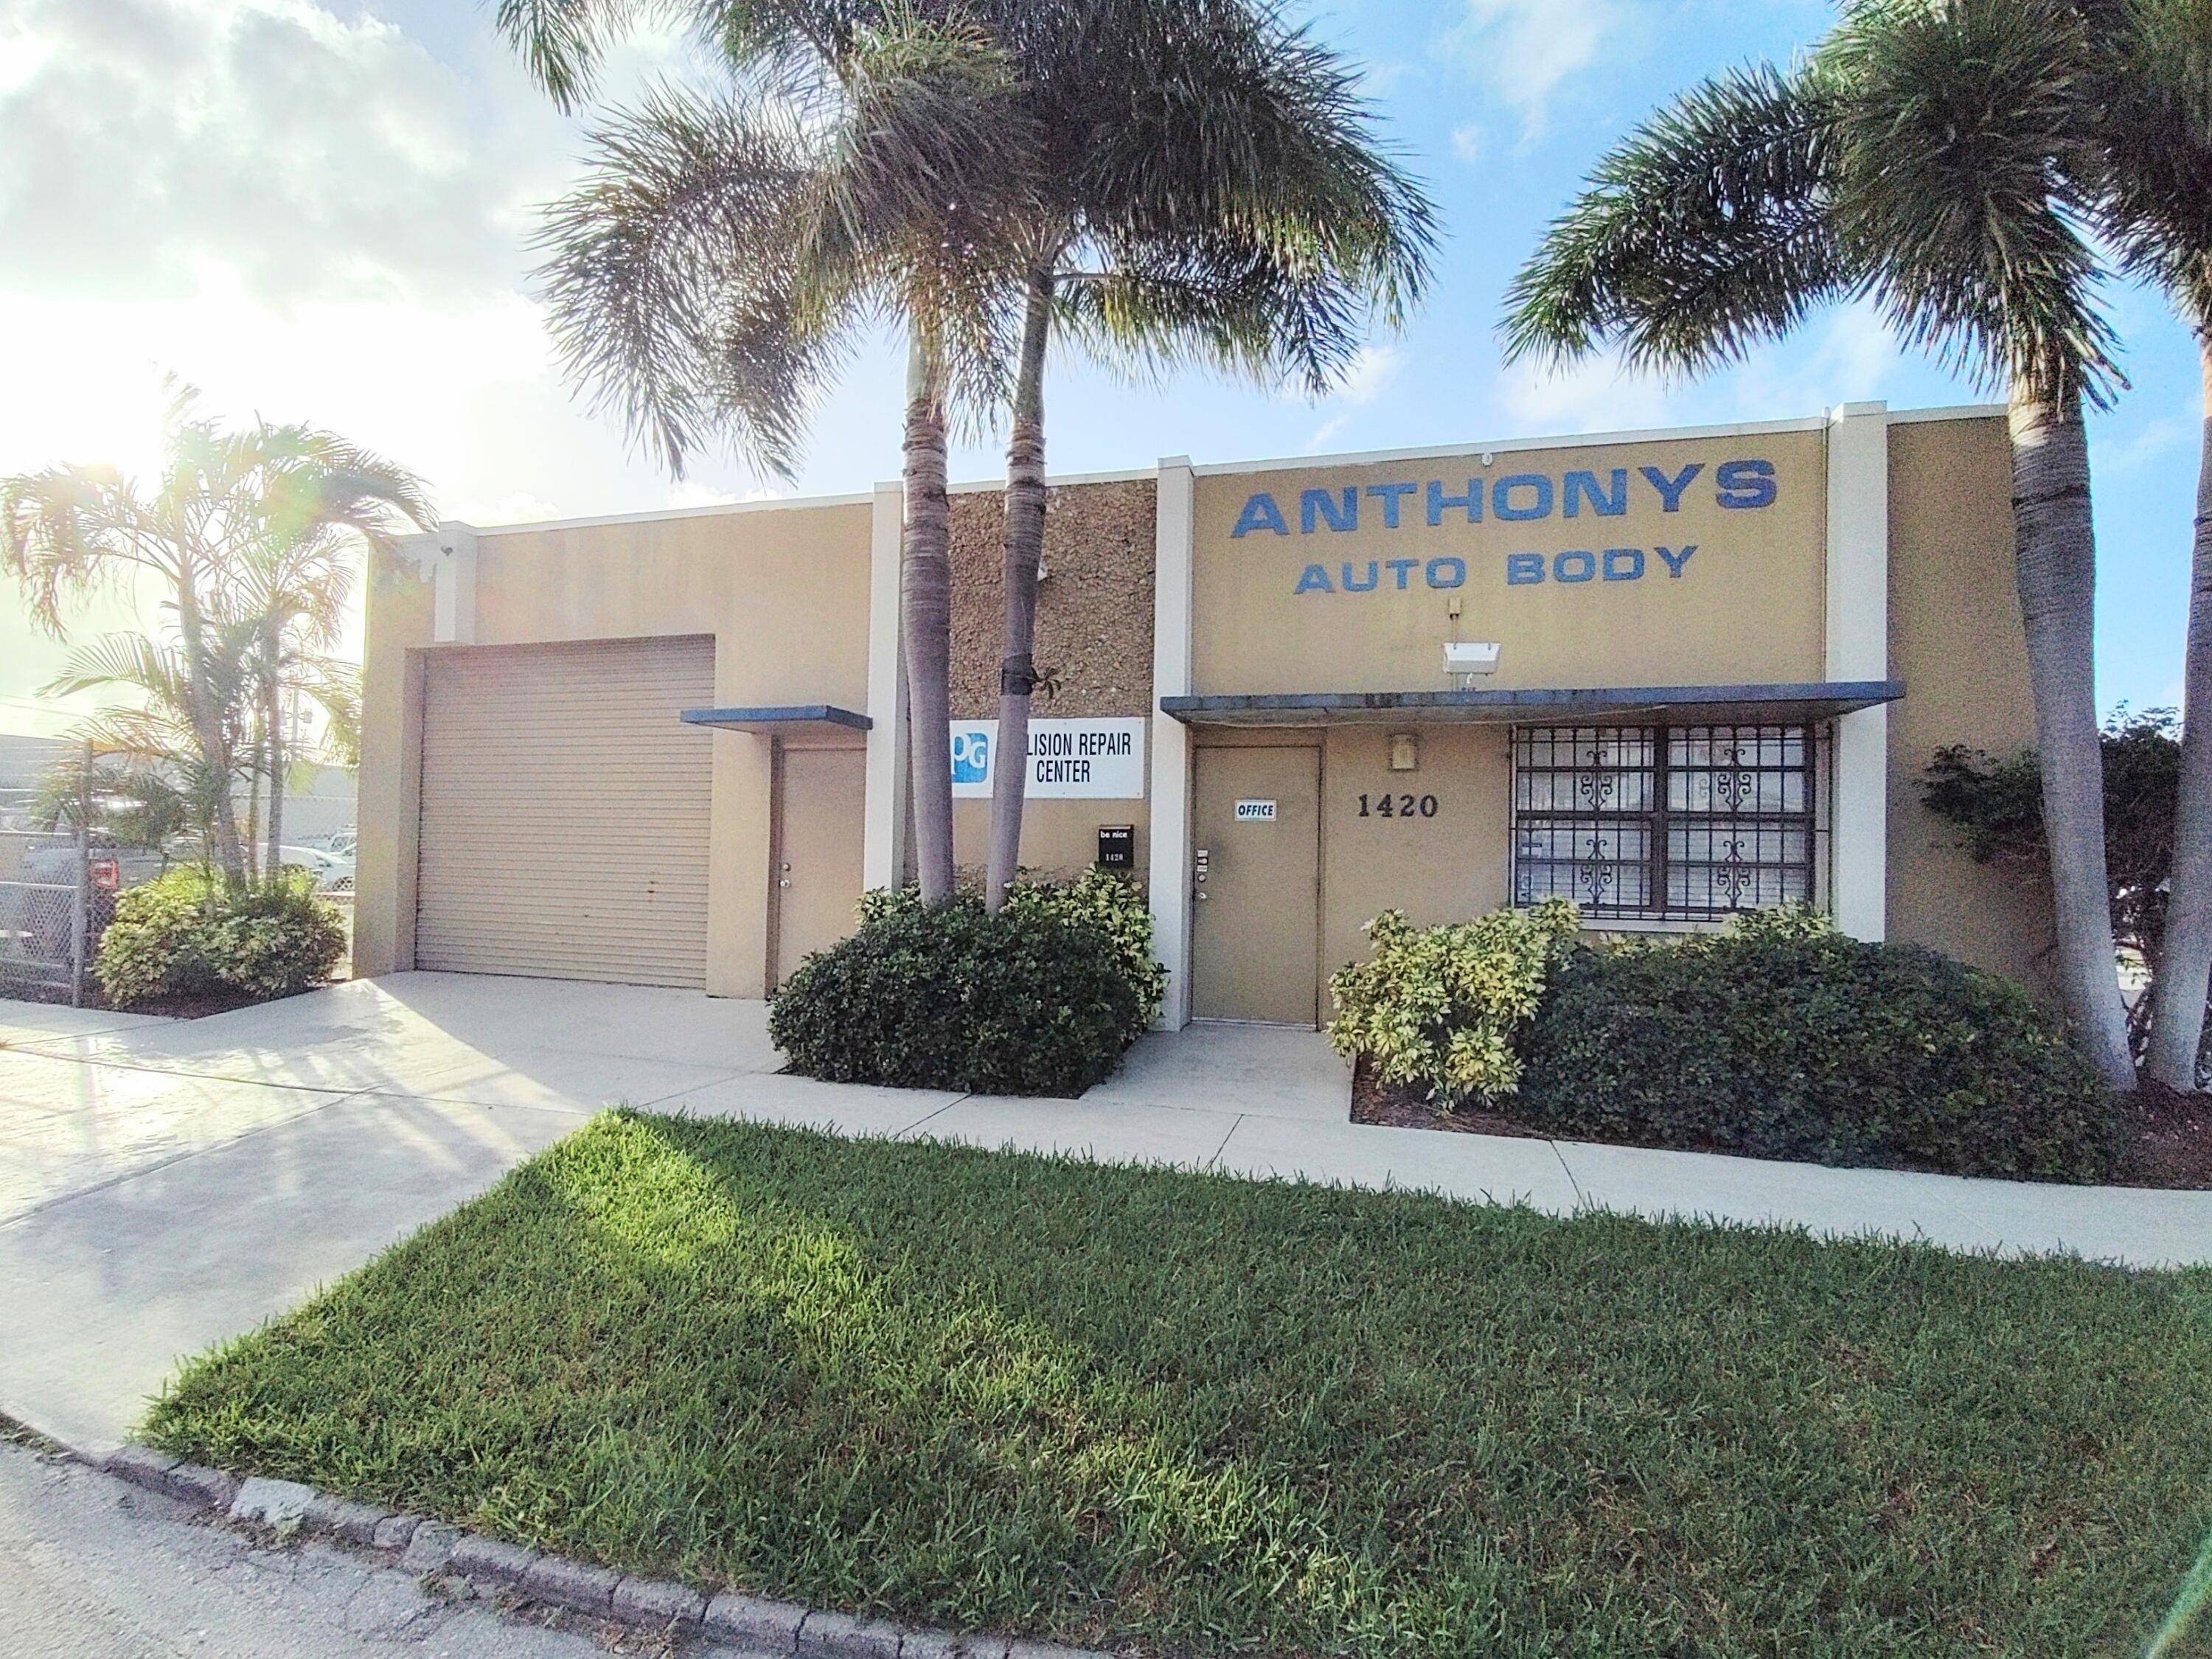 Anthony's Auto Body Collision repair, has been established for over 14 years.